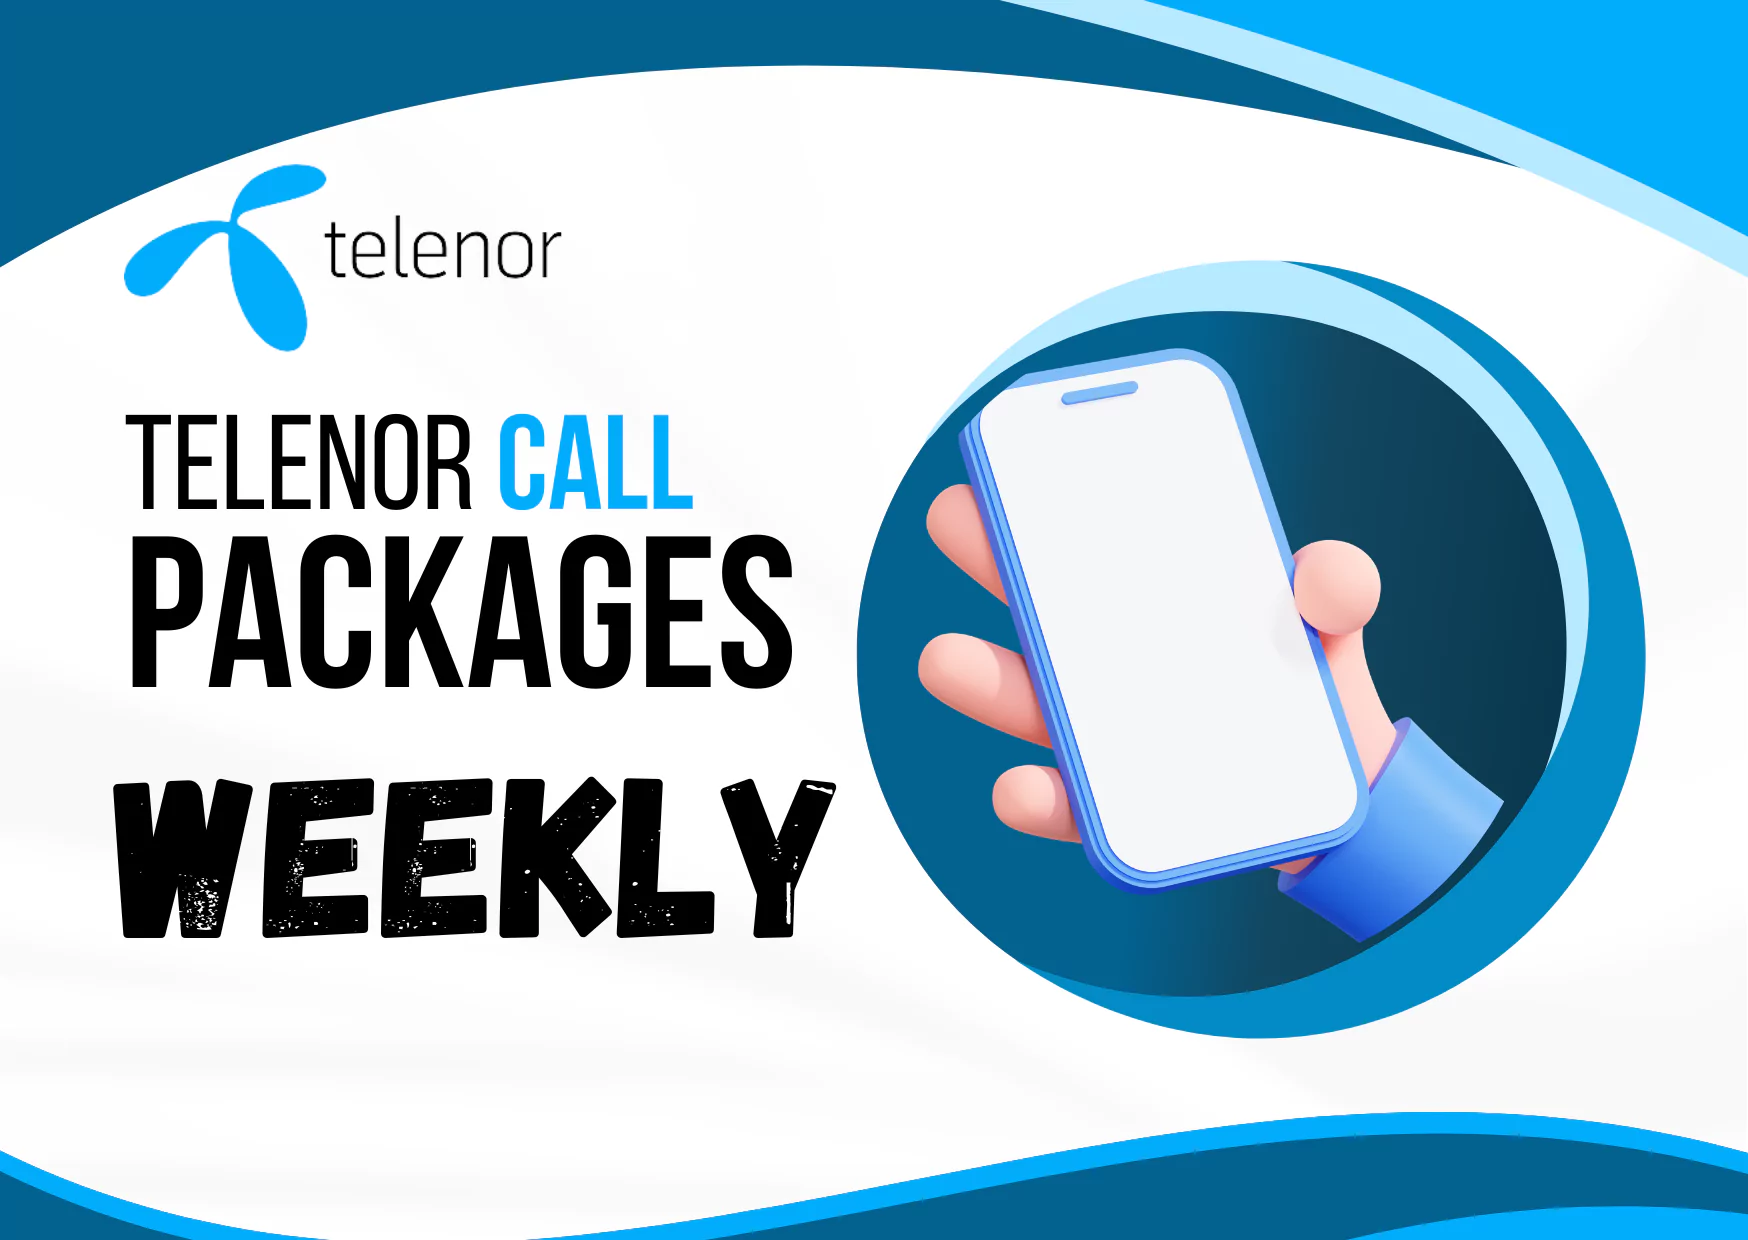 telenor call packages 7 days code